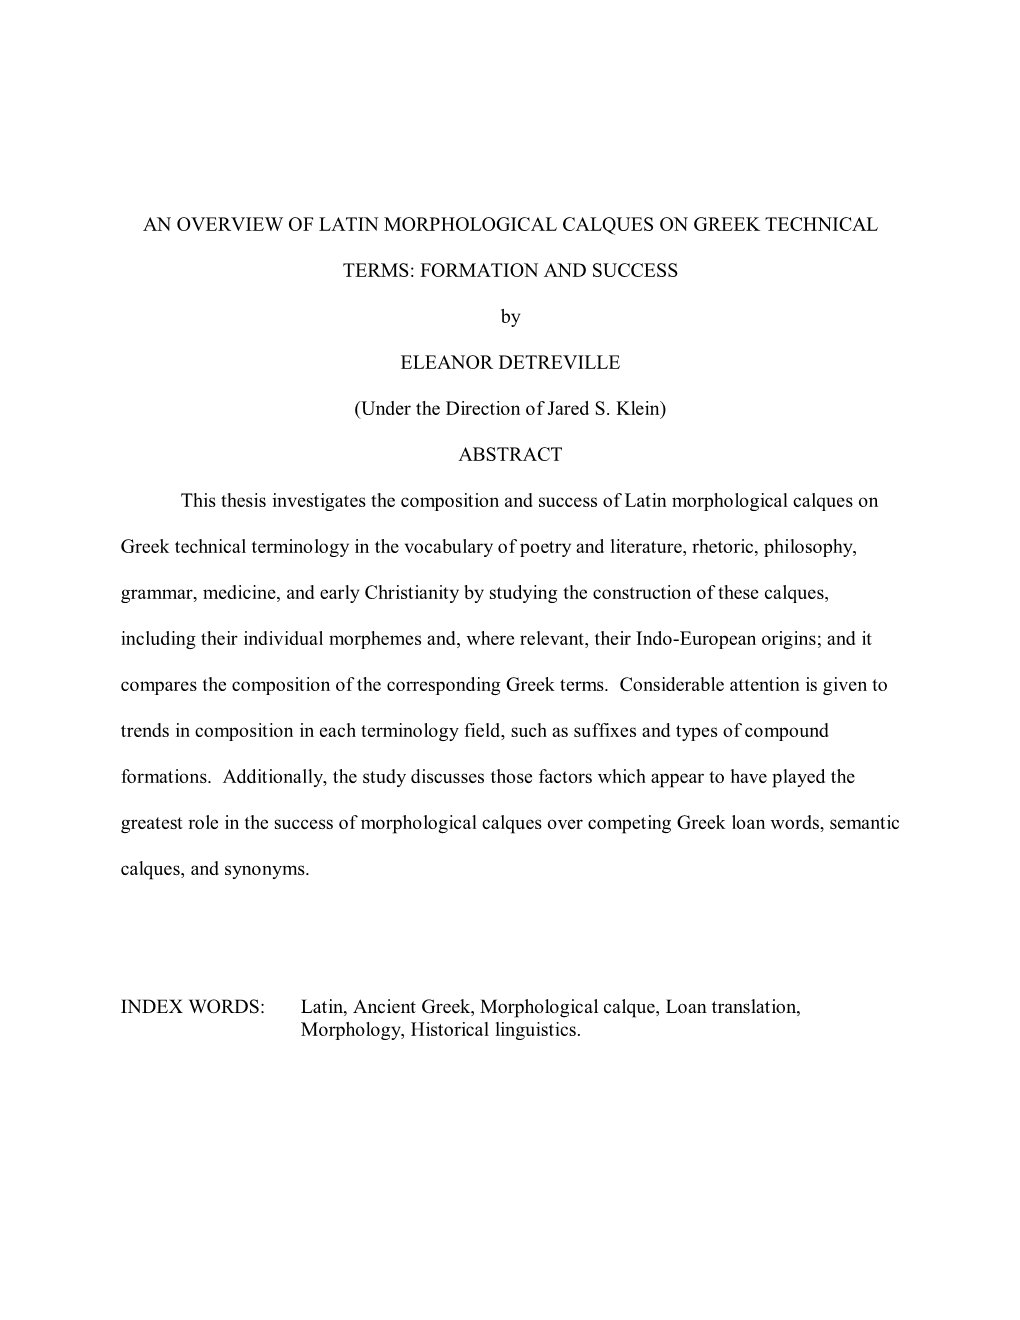 AN OVERVIEW of LATIN MORPHOLOGICAL CALQUES on GREEK TECHNICAL TERMS: FORMATION and SUCCESS by ELEANOR DETREVILLE (Under the Dire